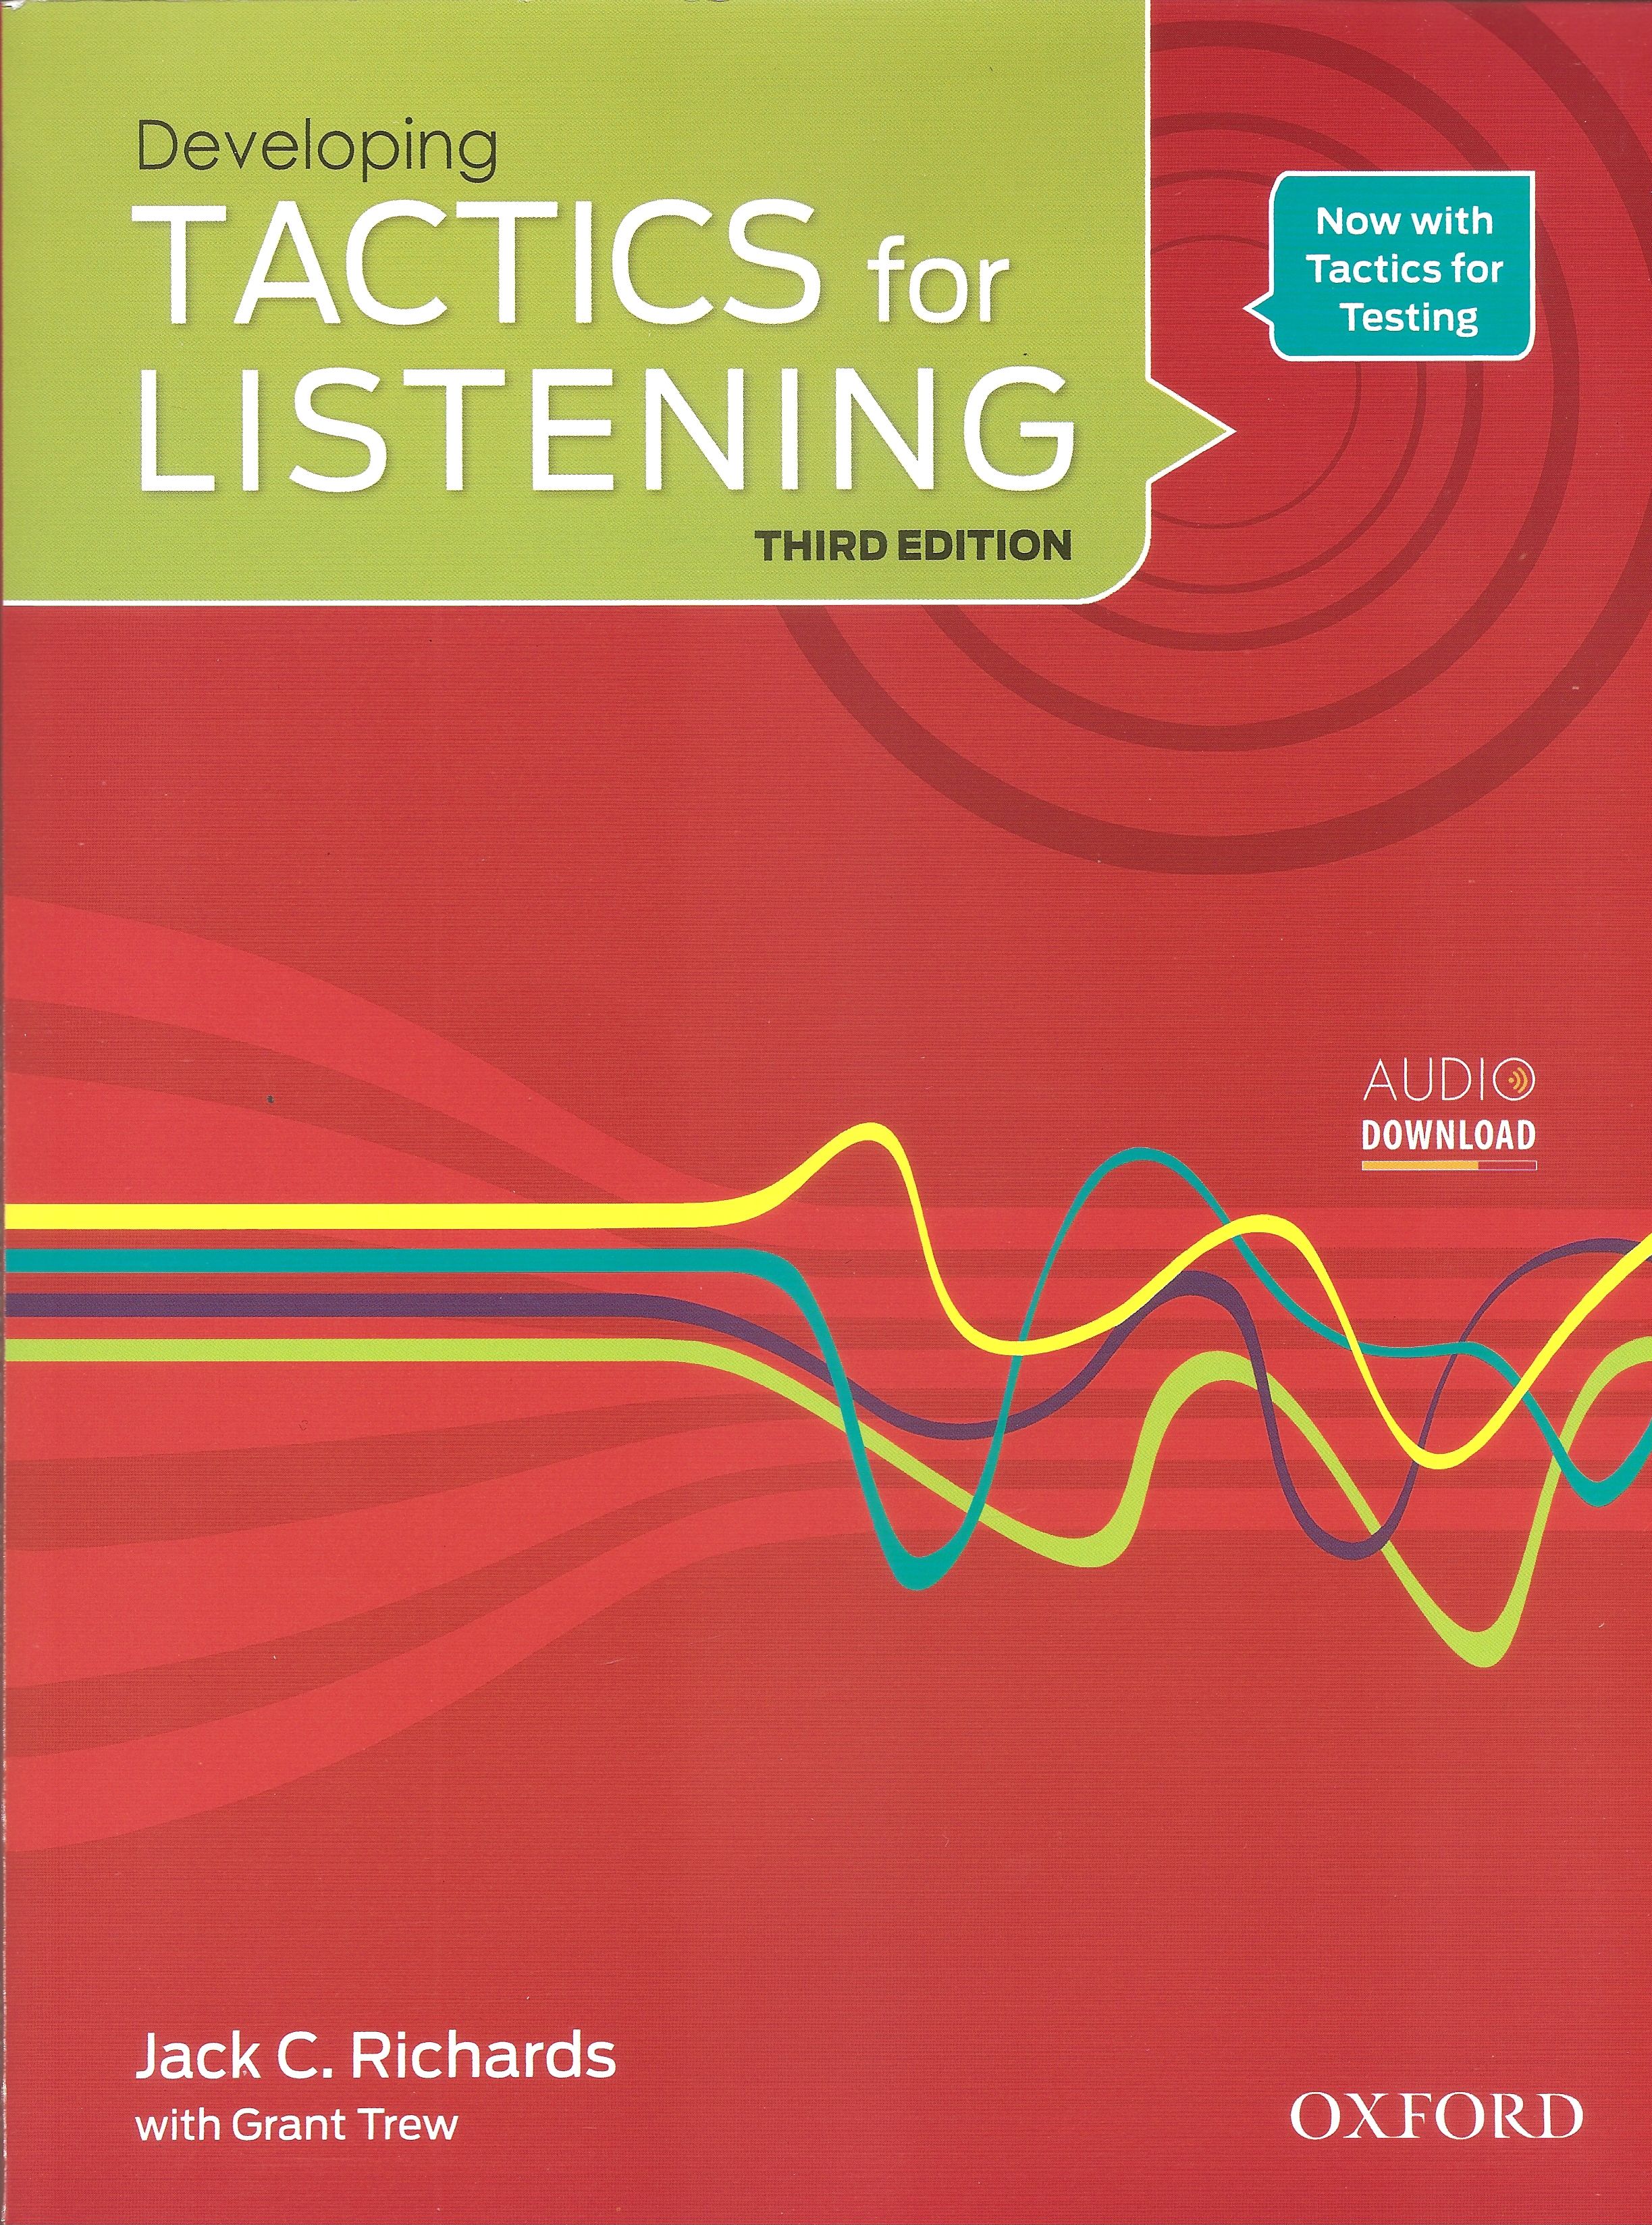 Tactics for Listening Develoing(oxford)